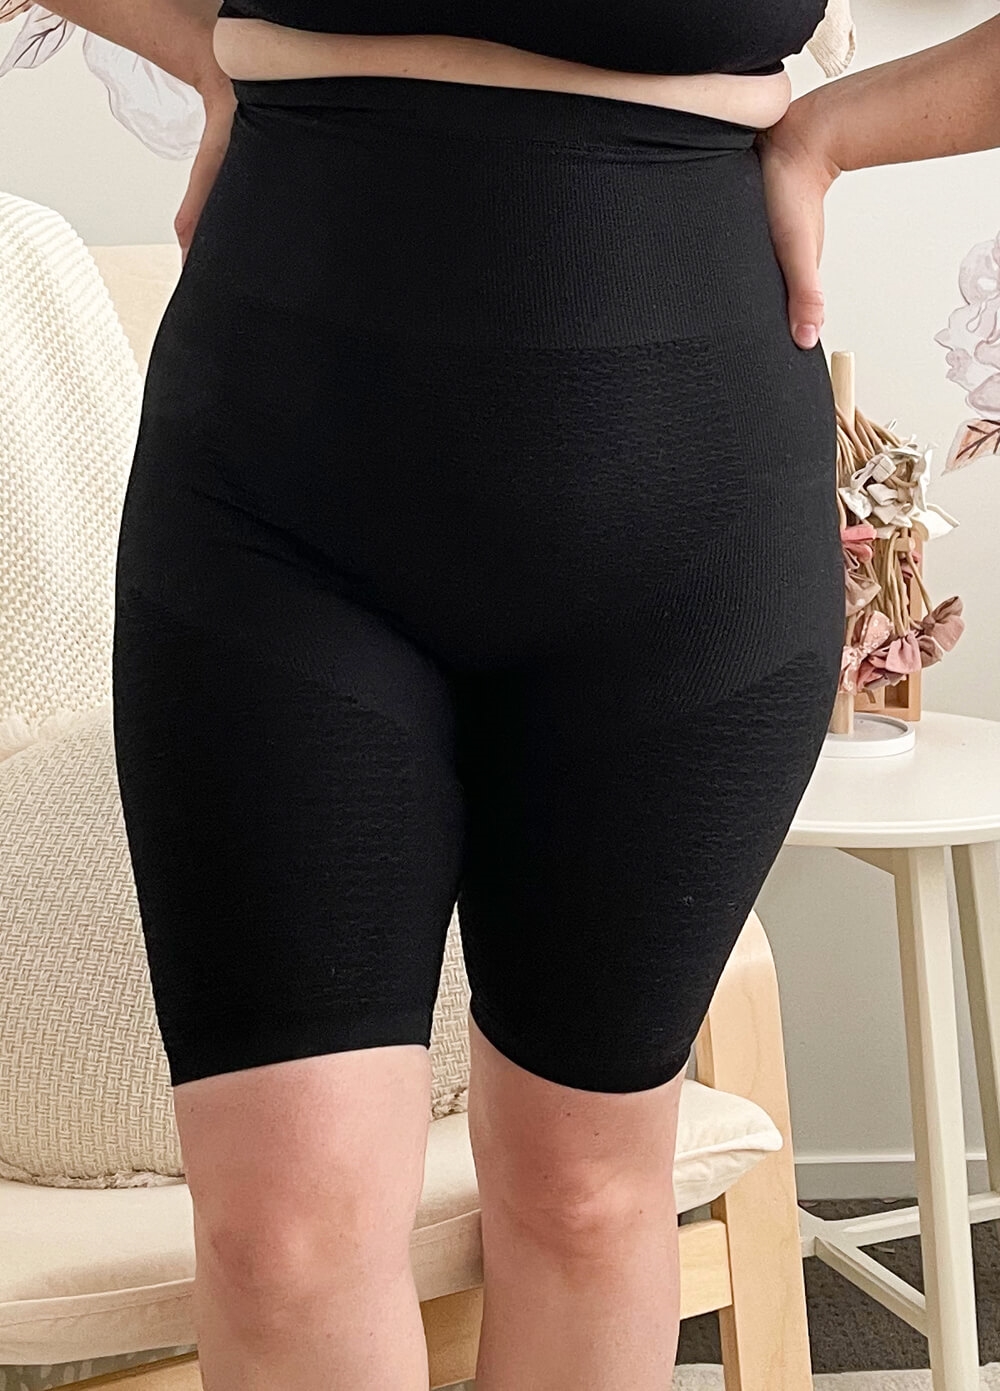 High Waist Postpartum Recovery Shorts in Black by Queen Bee 